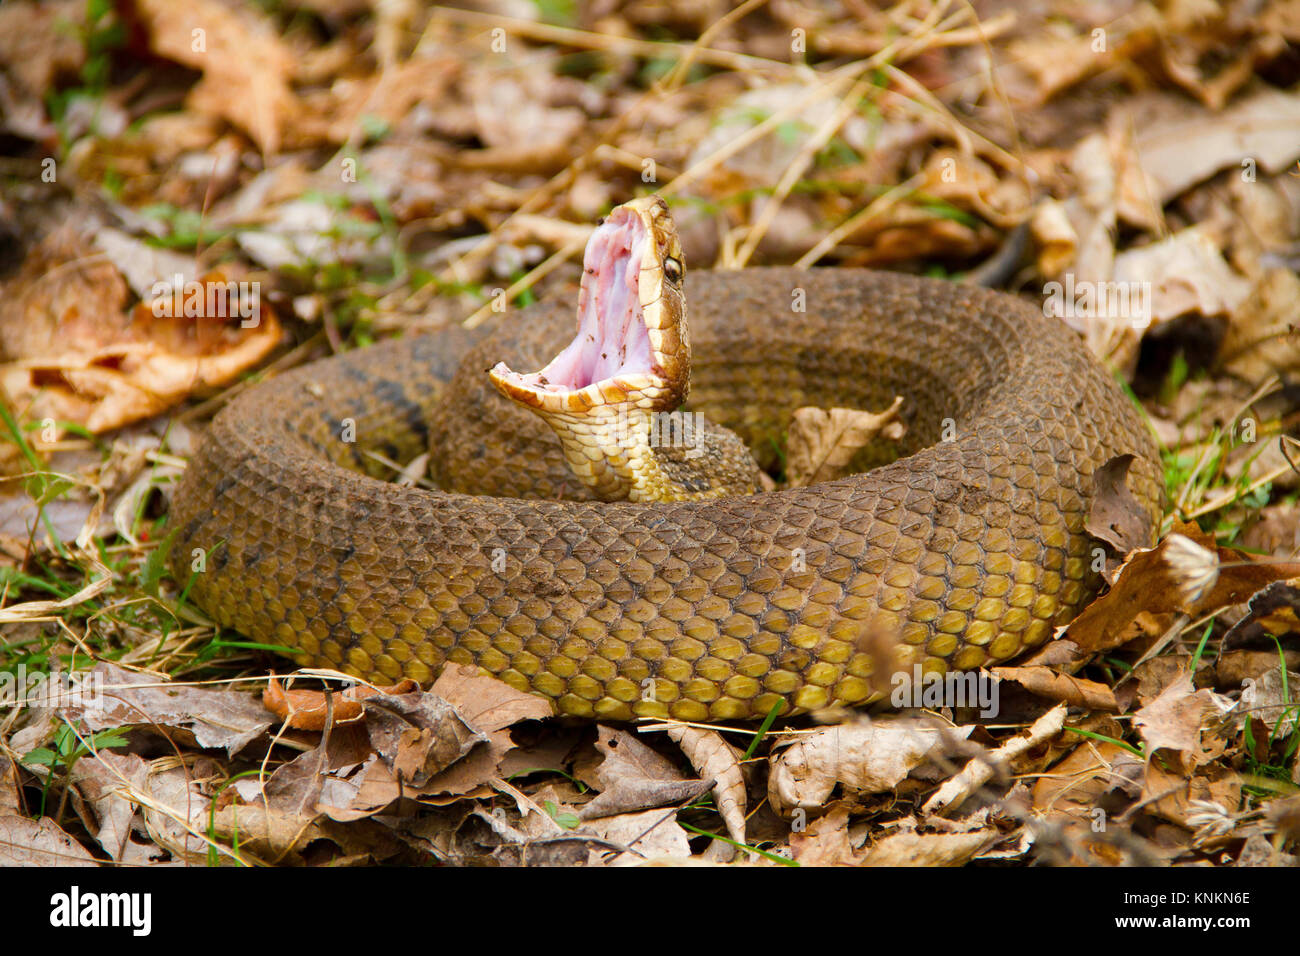 Water moccasin (Agkistrodon piscivorus) coiled with open mouth Stock Photo